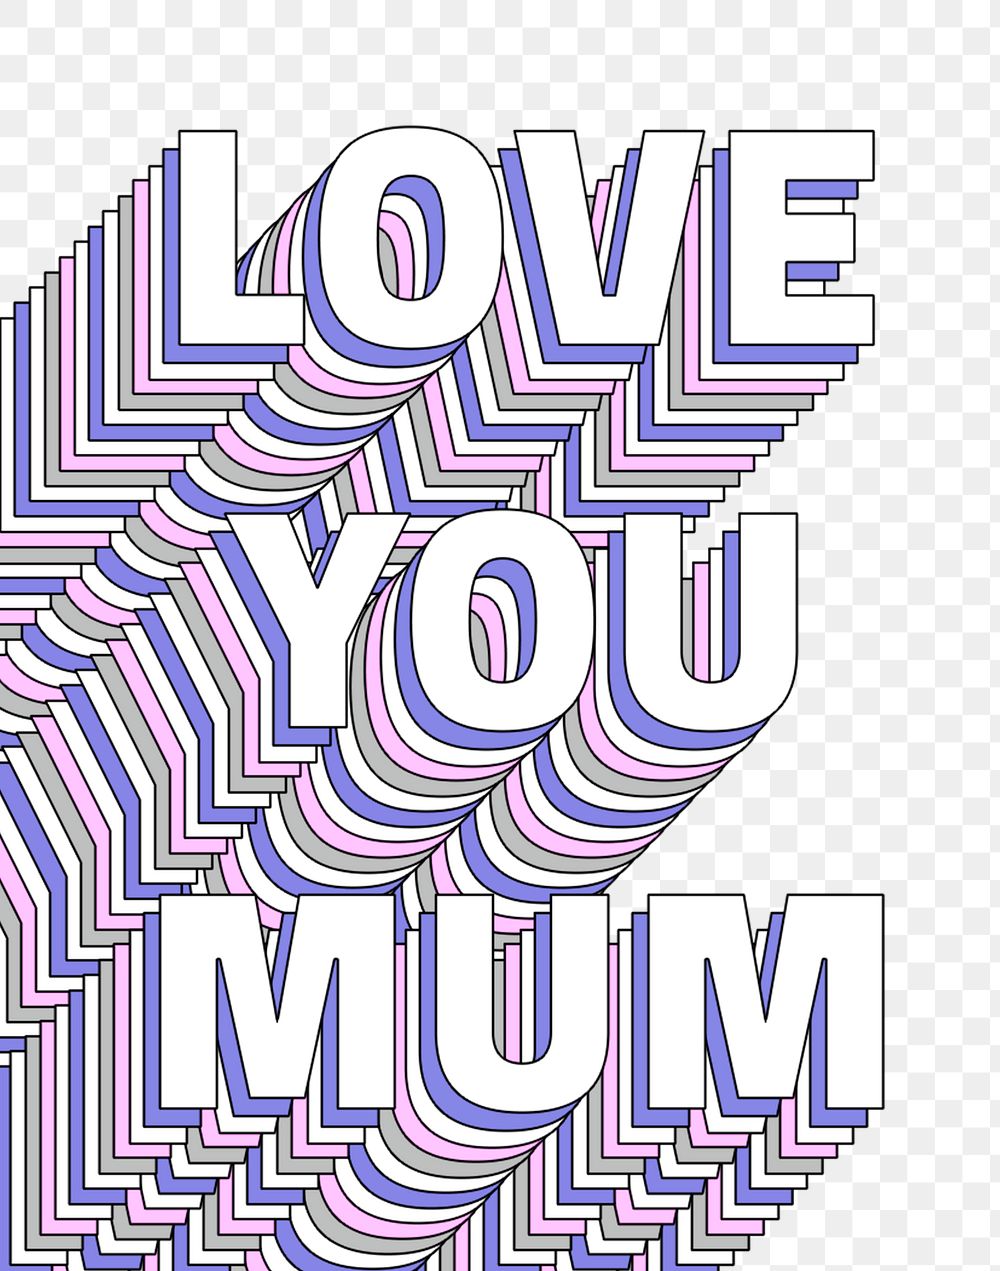 Png Love you mum layered message typography retro word